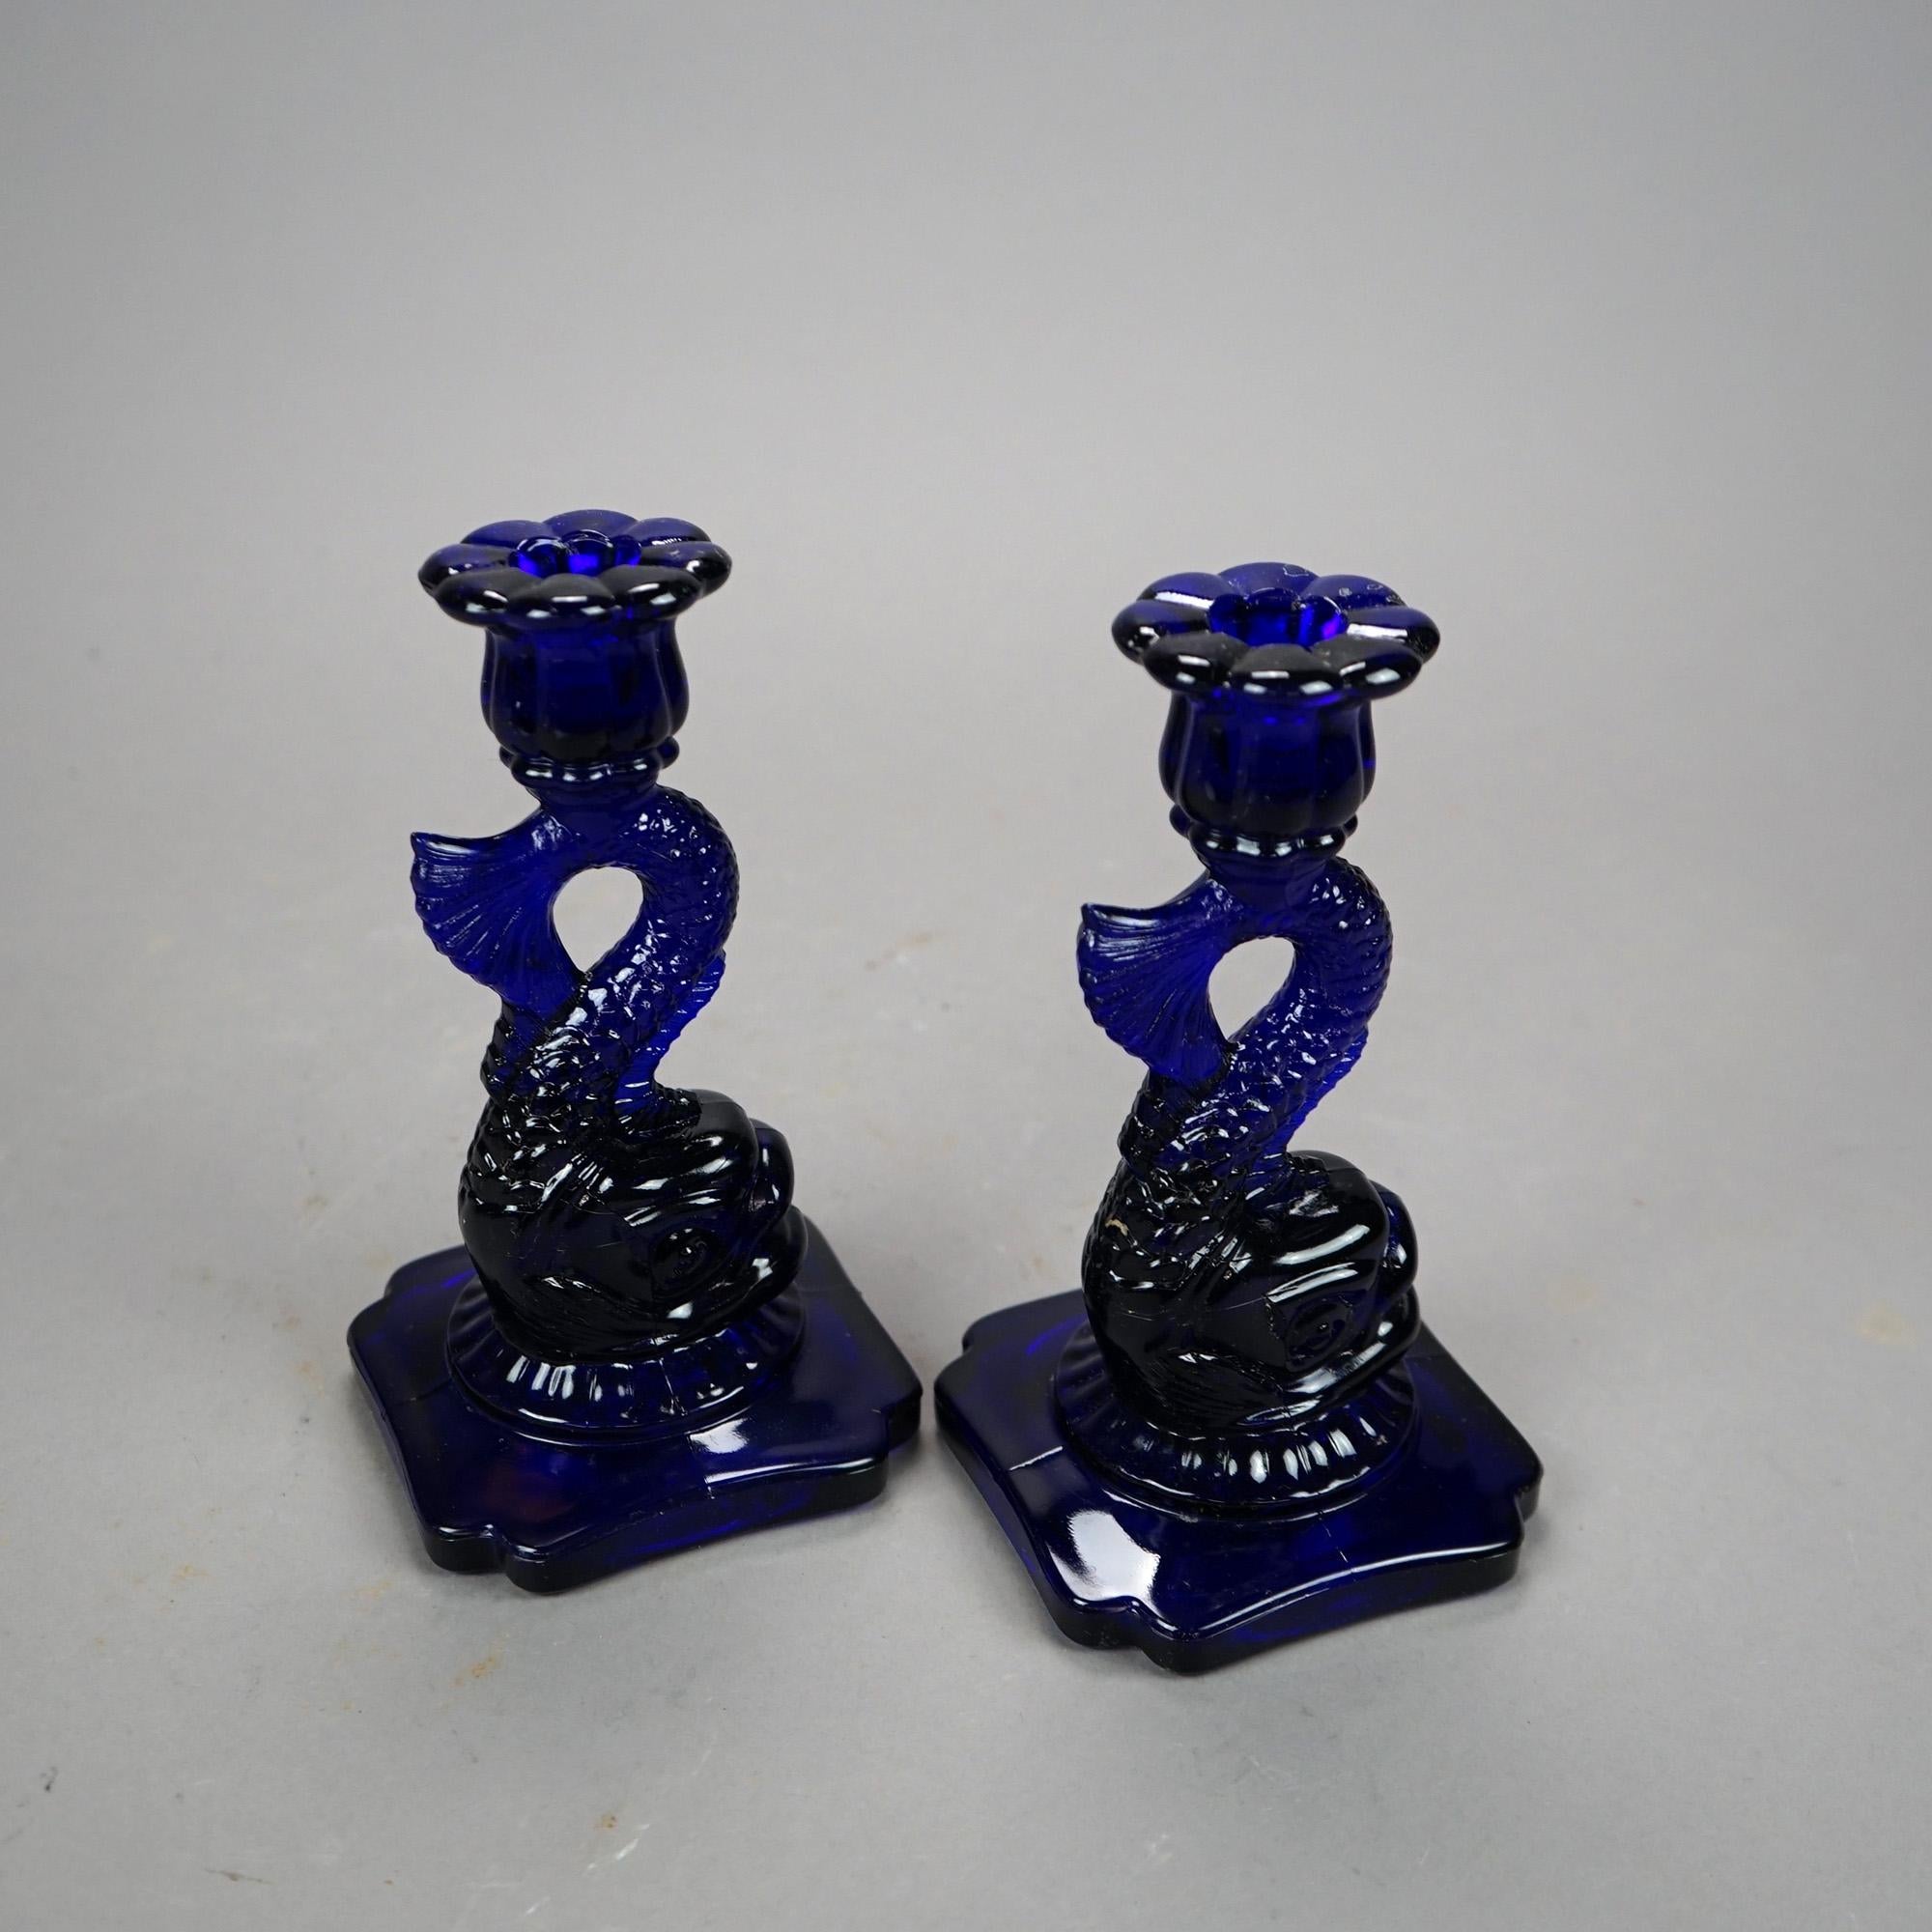 A pair of figural candlesticks offer molded cobalt art glass construction in dolphin form, 20th century.

Measures - 8''H x 4.5''W x 4.5''D.

Catalogue Note: Ask about DISCOUNTED DELIVERY RATES available to most regions within 1,500 miles of New